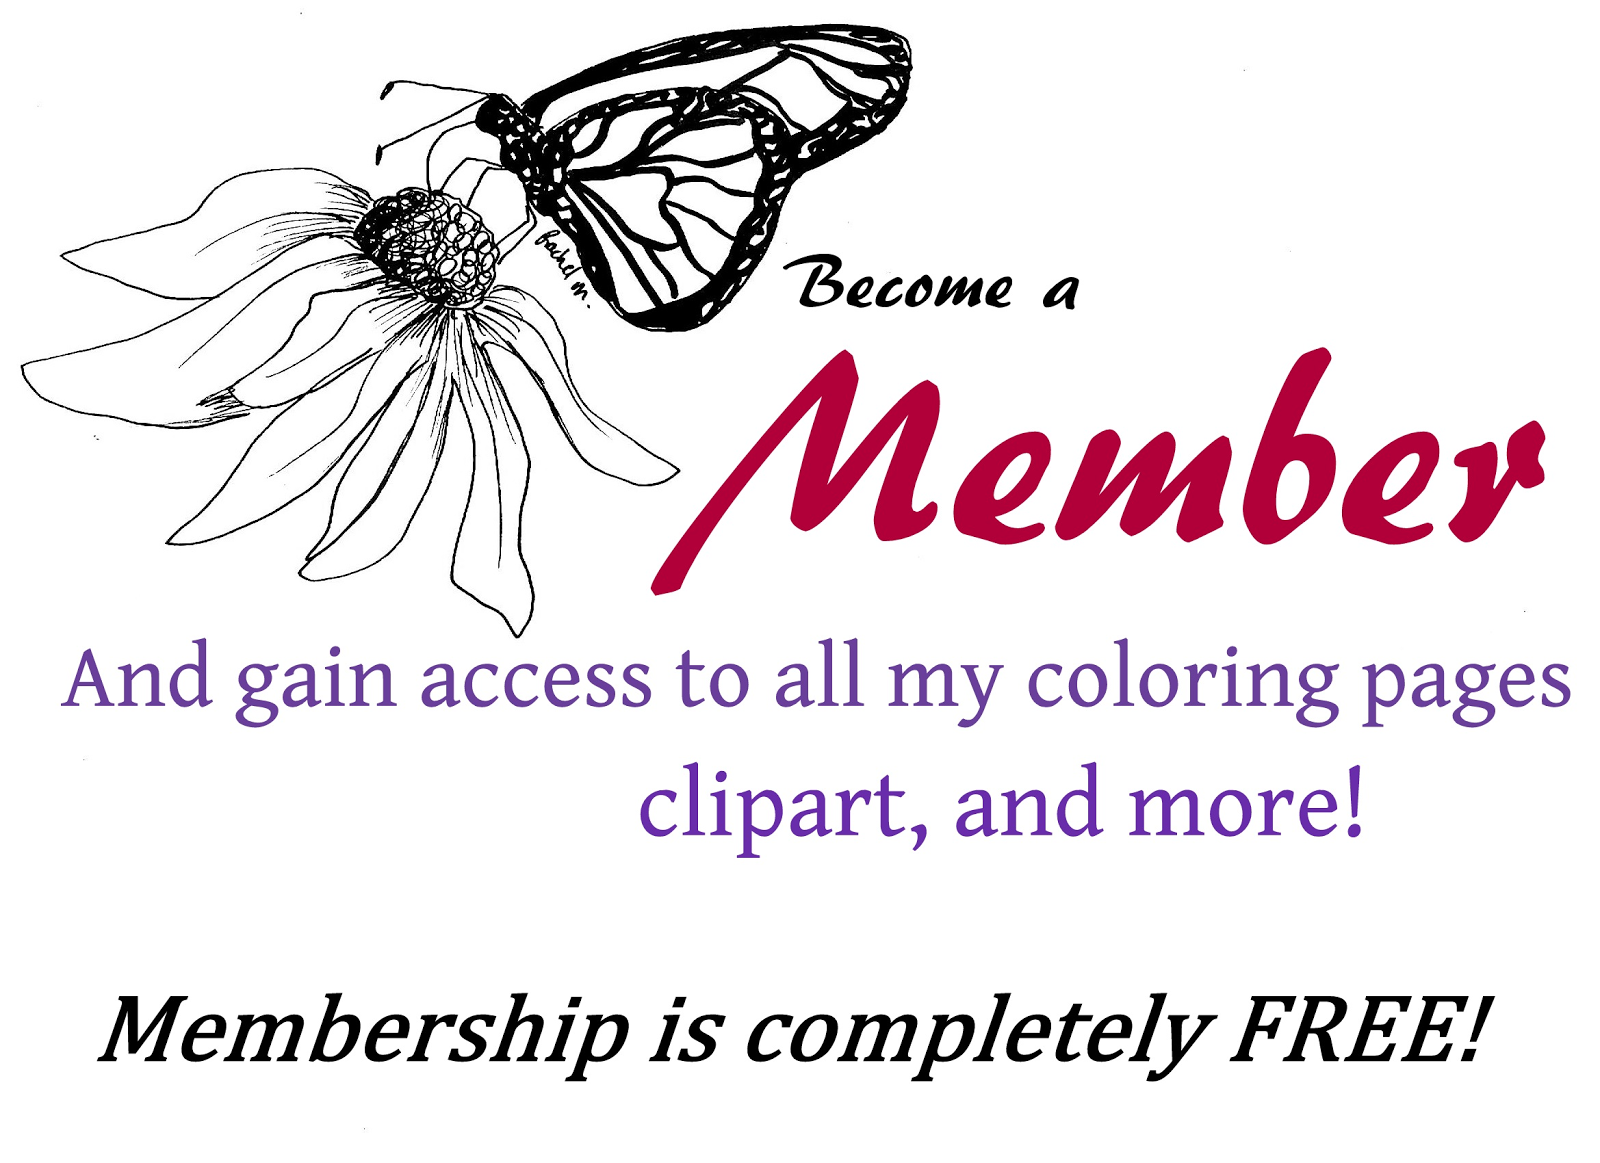 Become a Member! It's Totally Free!